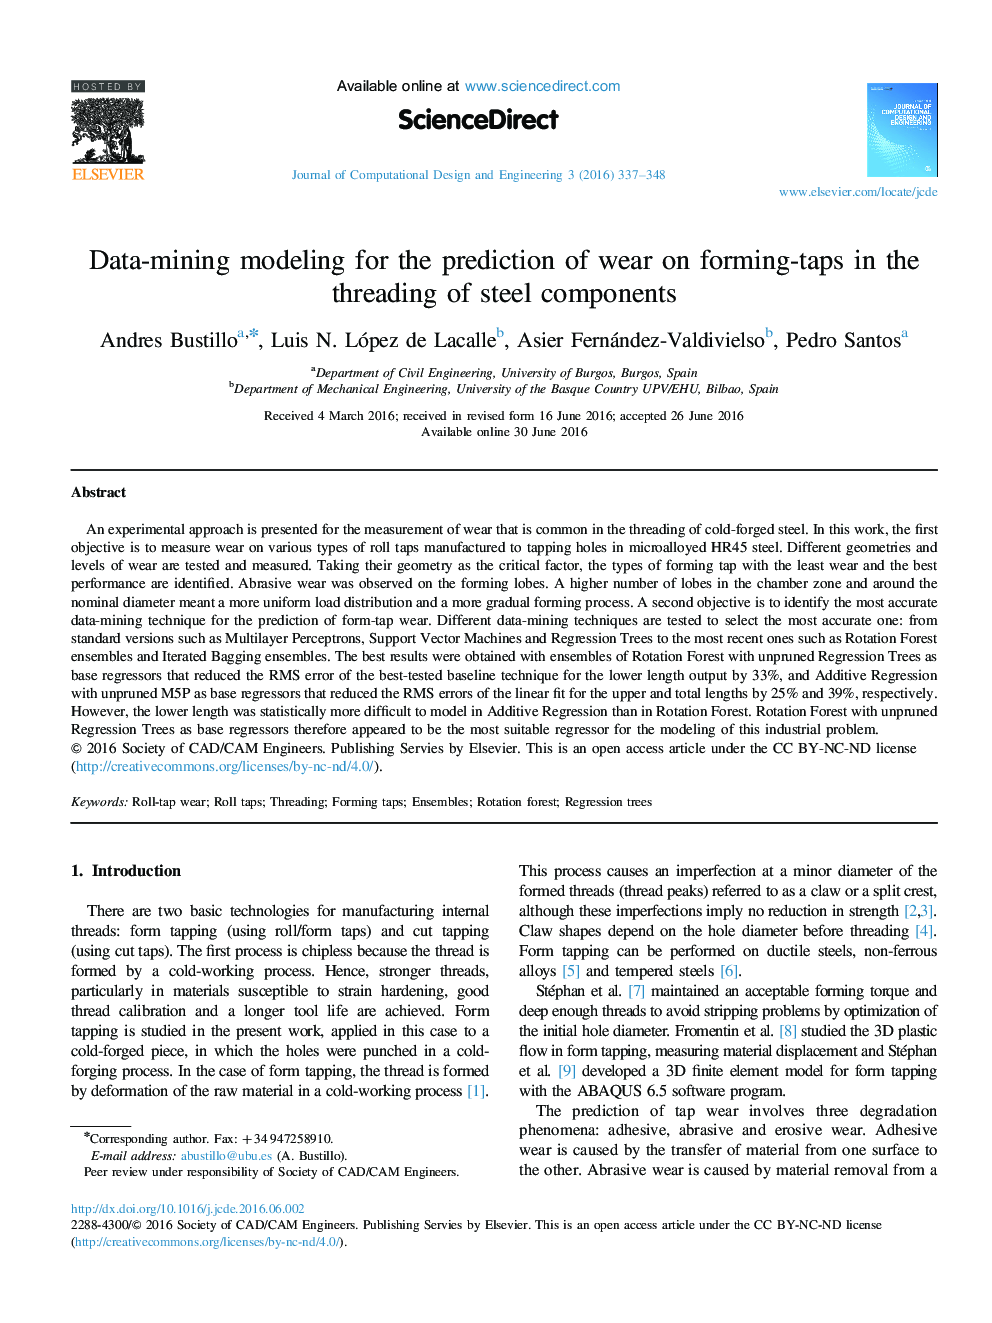 Data-mining modeling for the prediction of wear on forming-taps in the threading of steel components